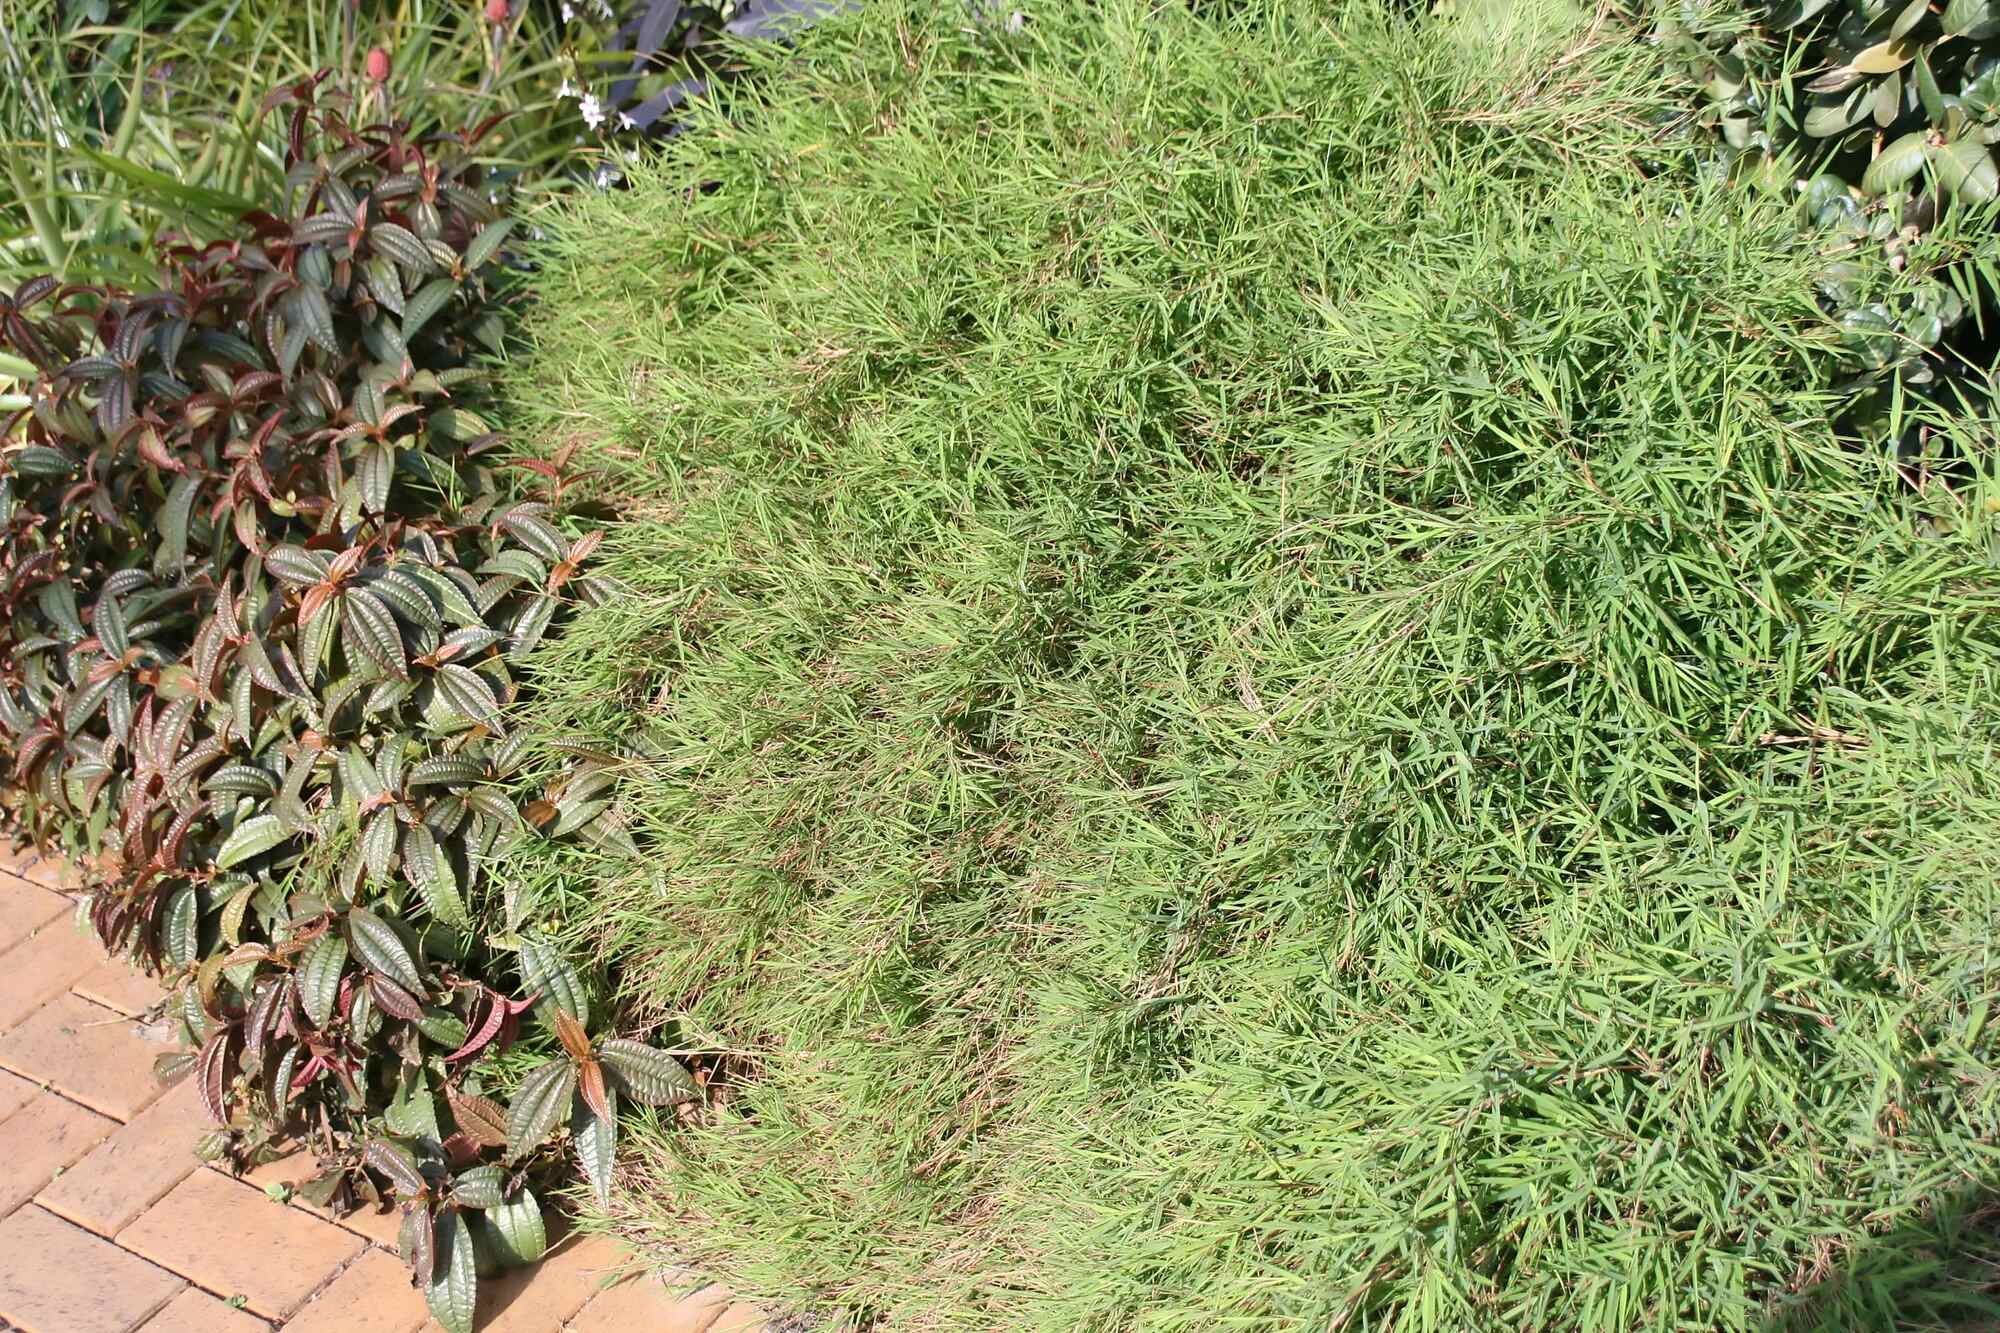 Photograph of baby bamboo grass outside along a brick path as a decorative plant.